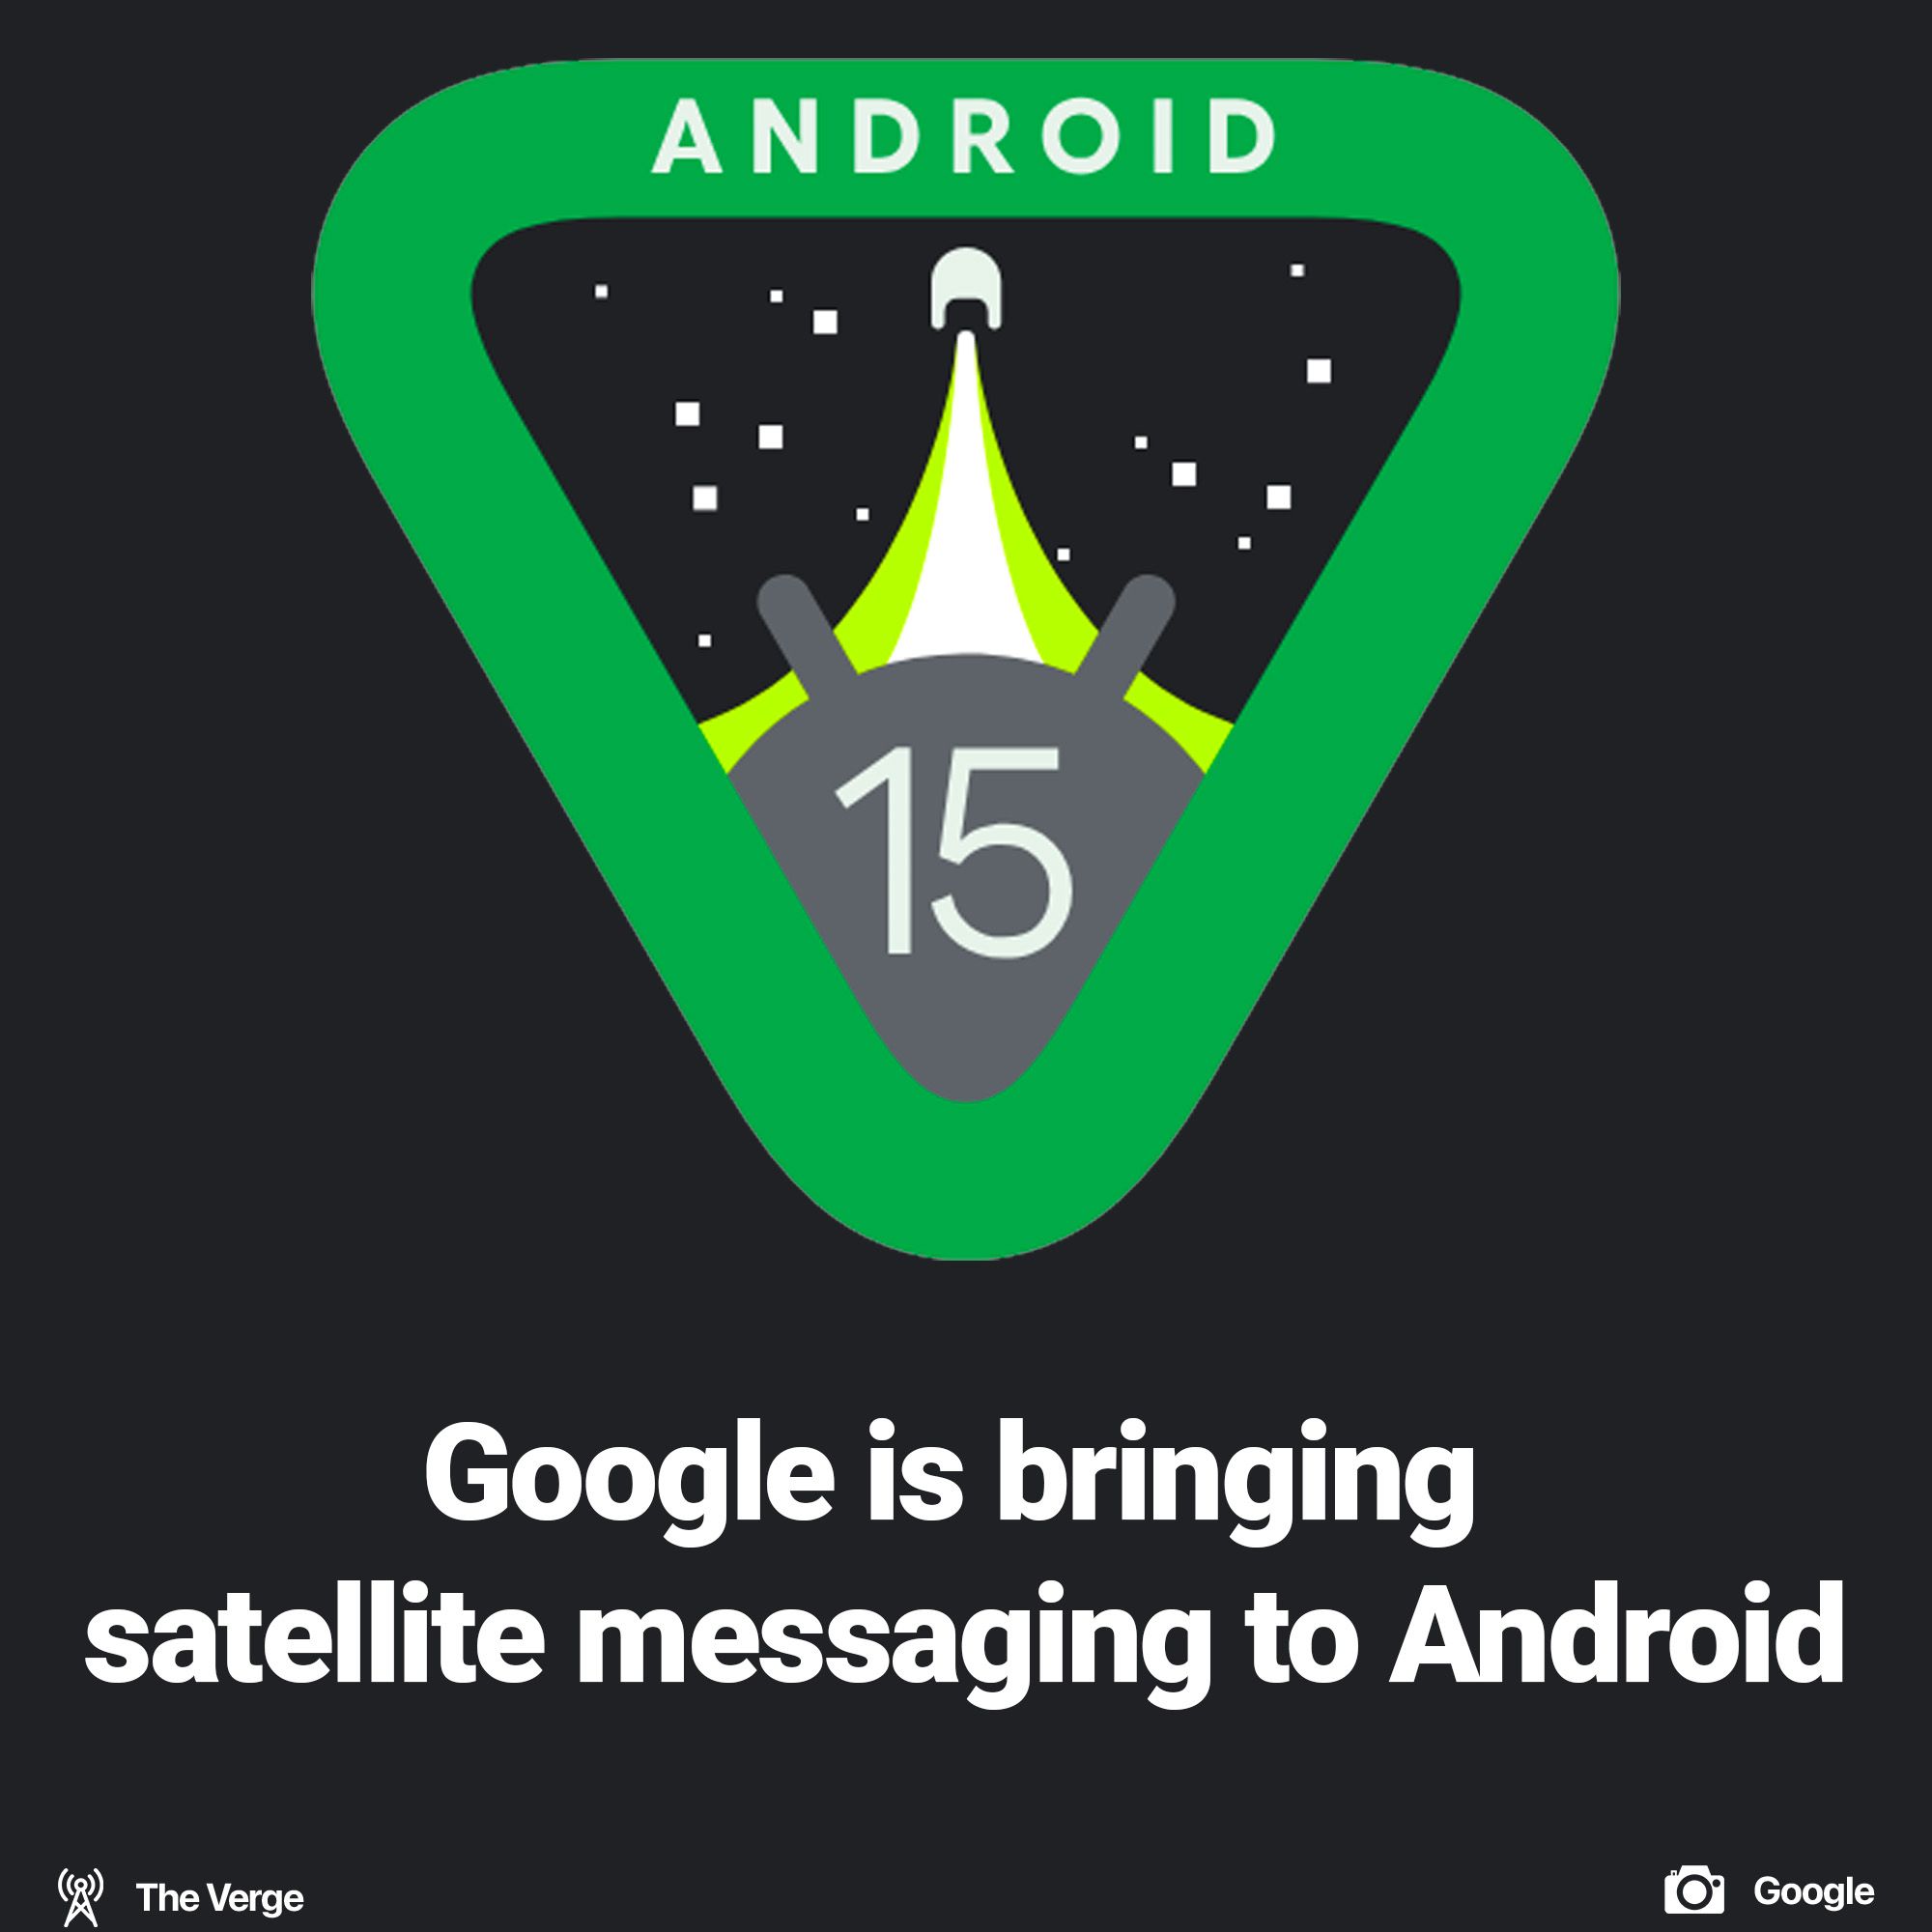 Satellite messaging coming to Android